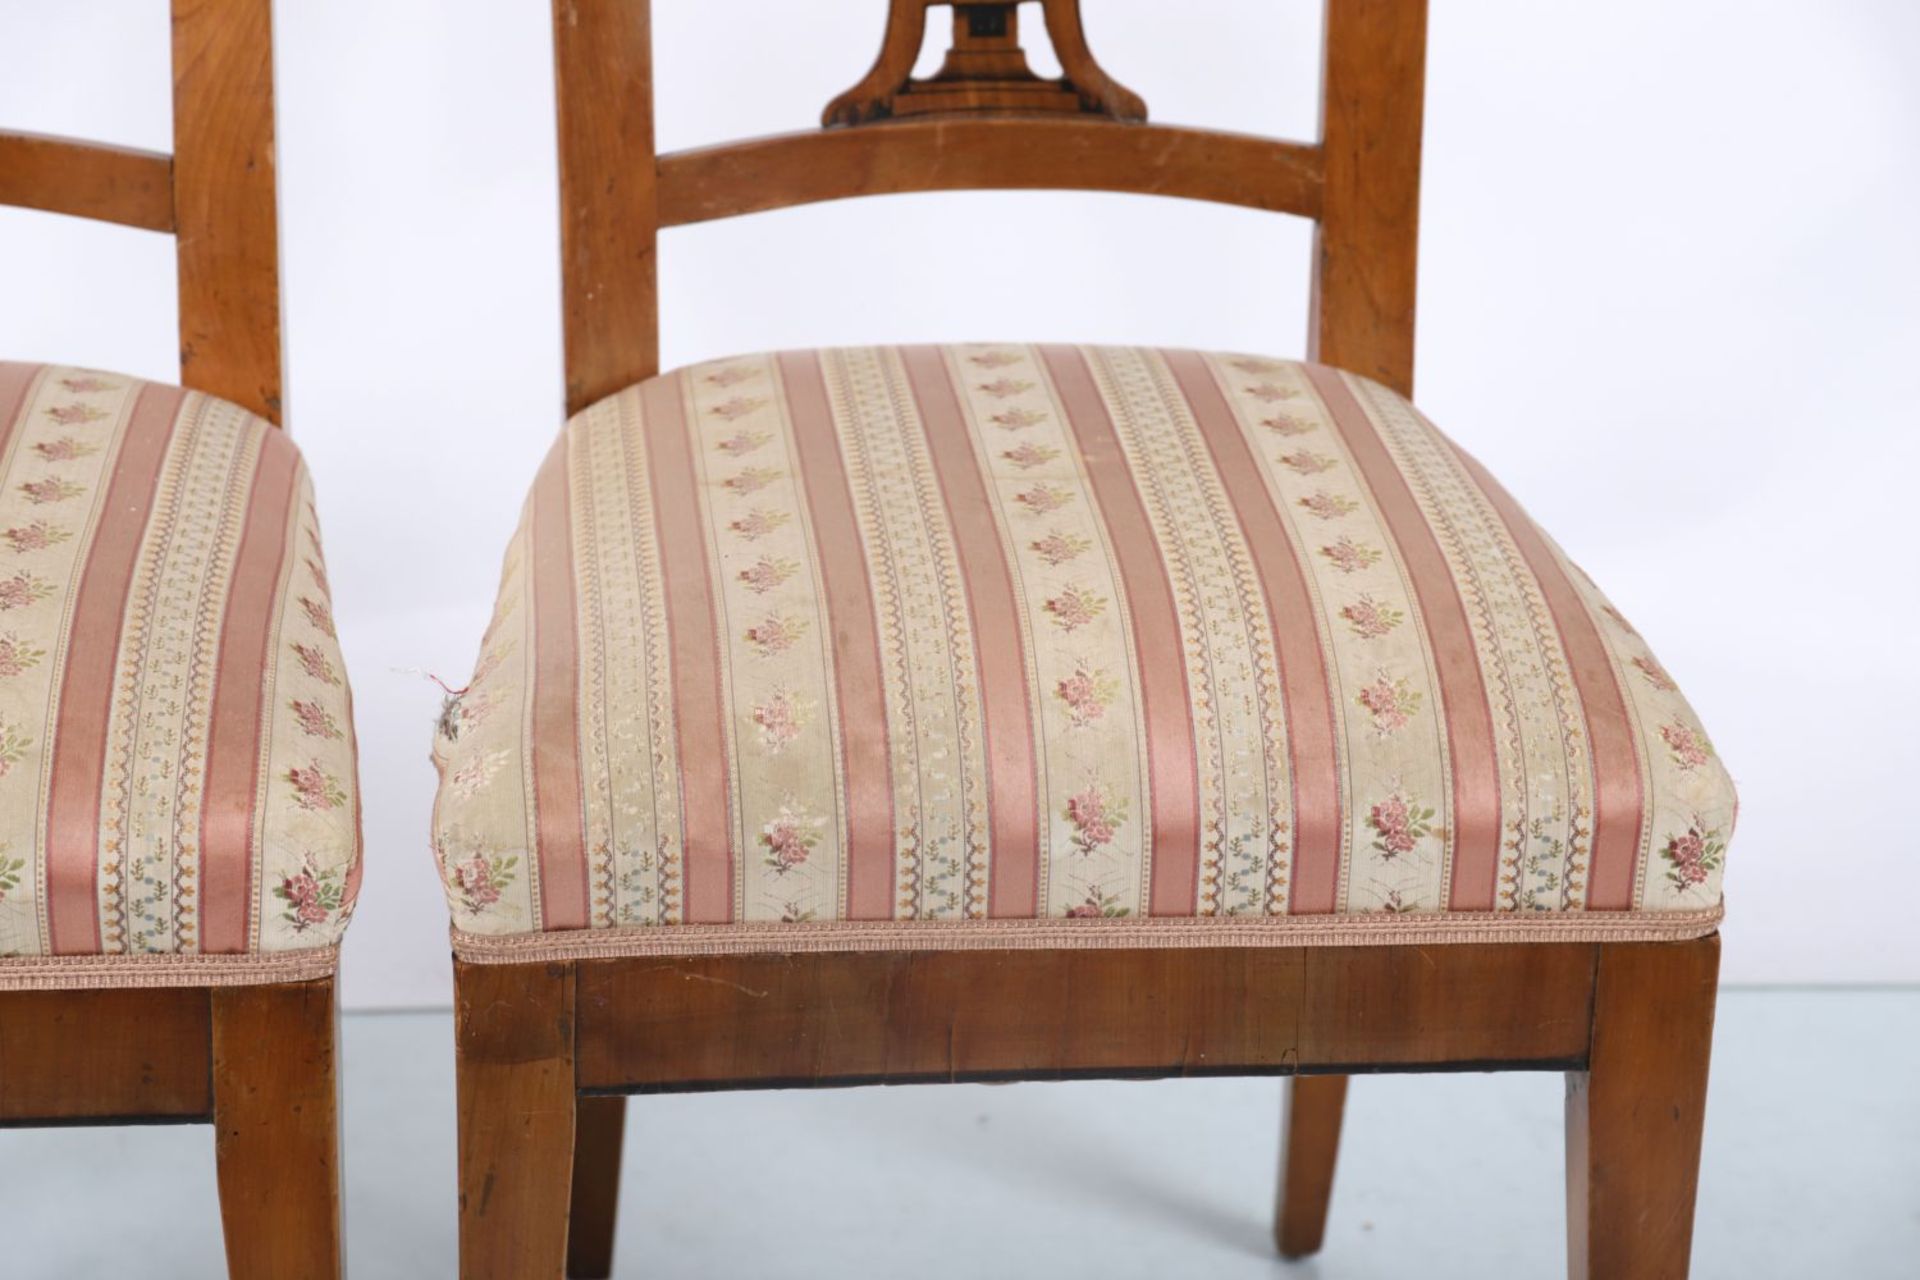 PAIR 19TH-CENTURY WALNUT BIEDERMIER CHAIRS - Image 3 of 3